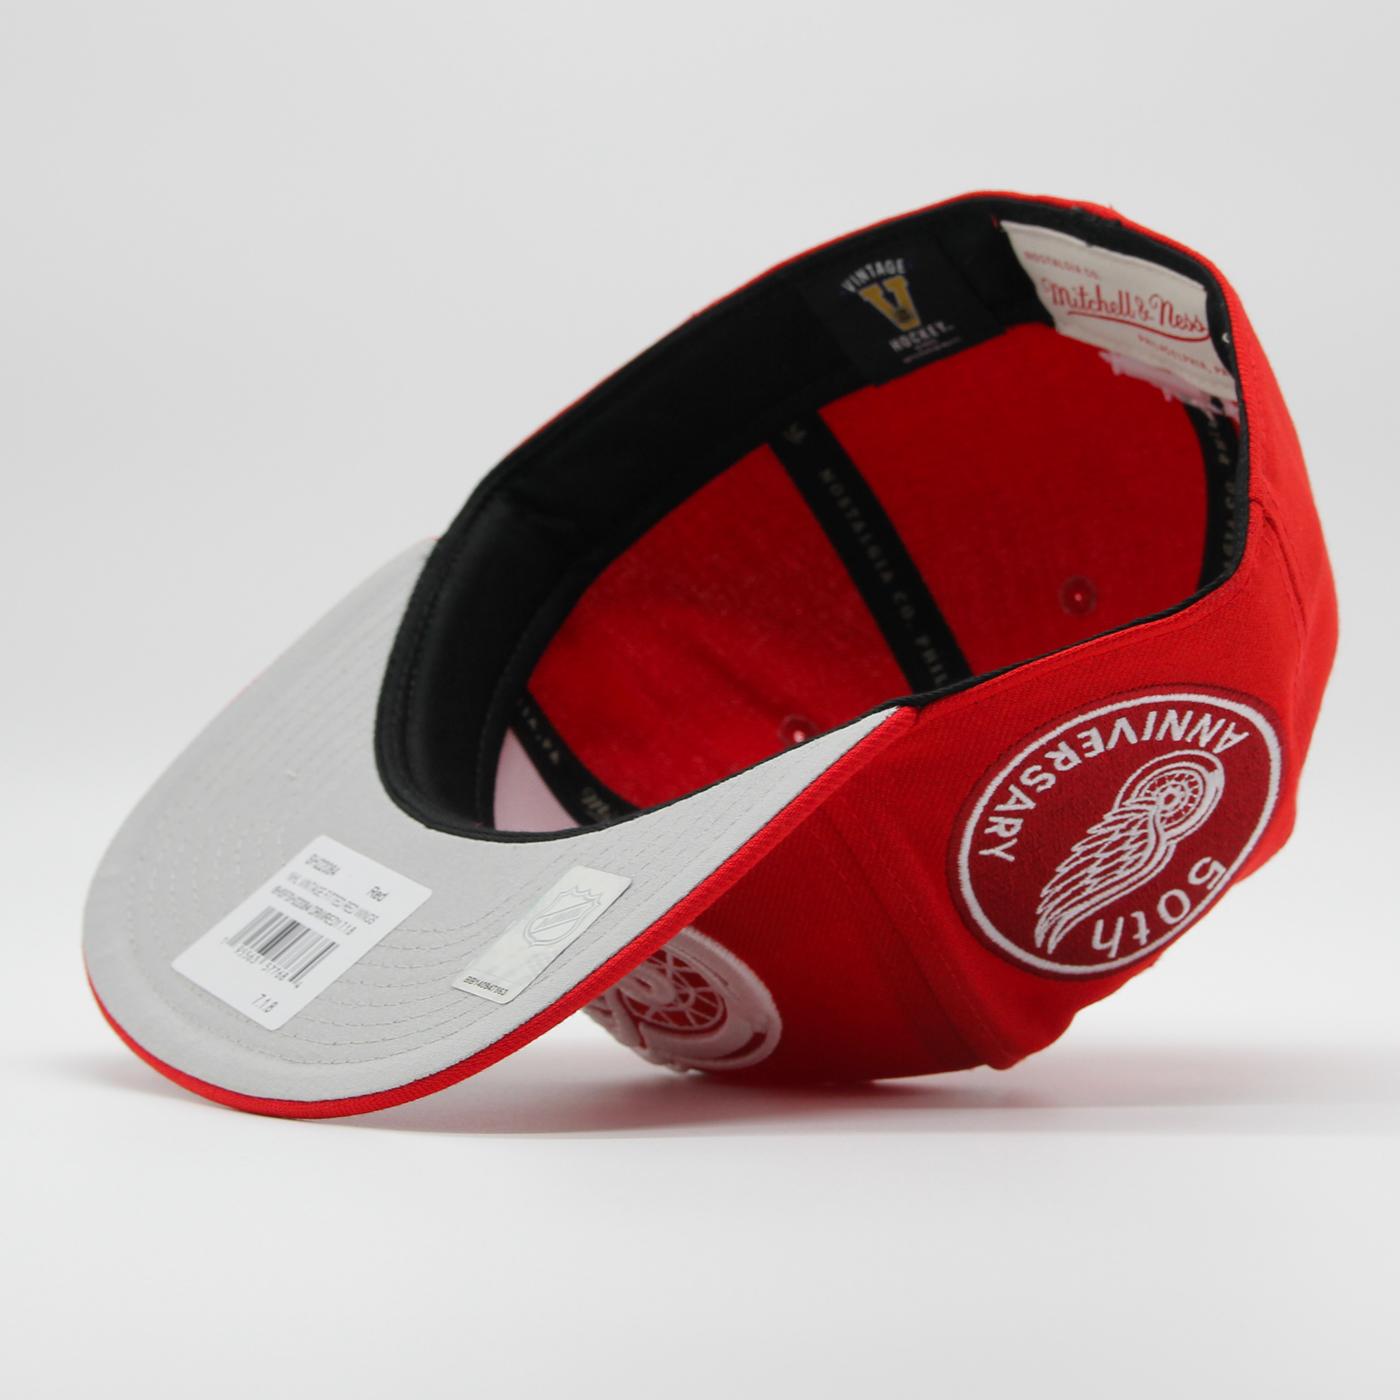 Mitchell & Ness NHL Vintage Fitted D Red Wings red - Shop-Tetuan